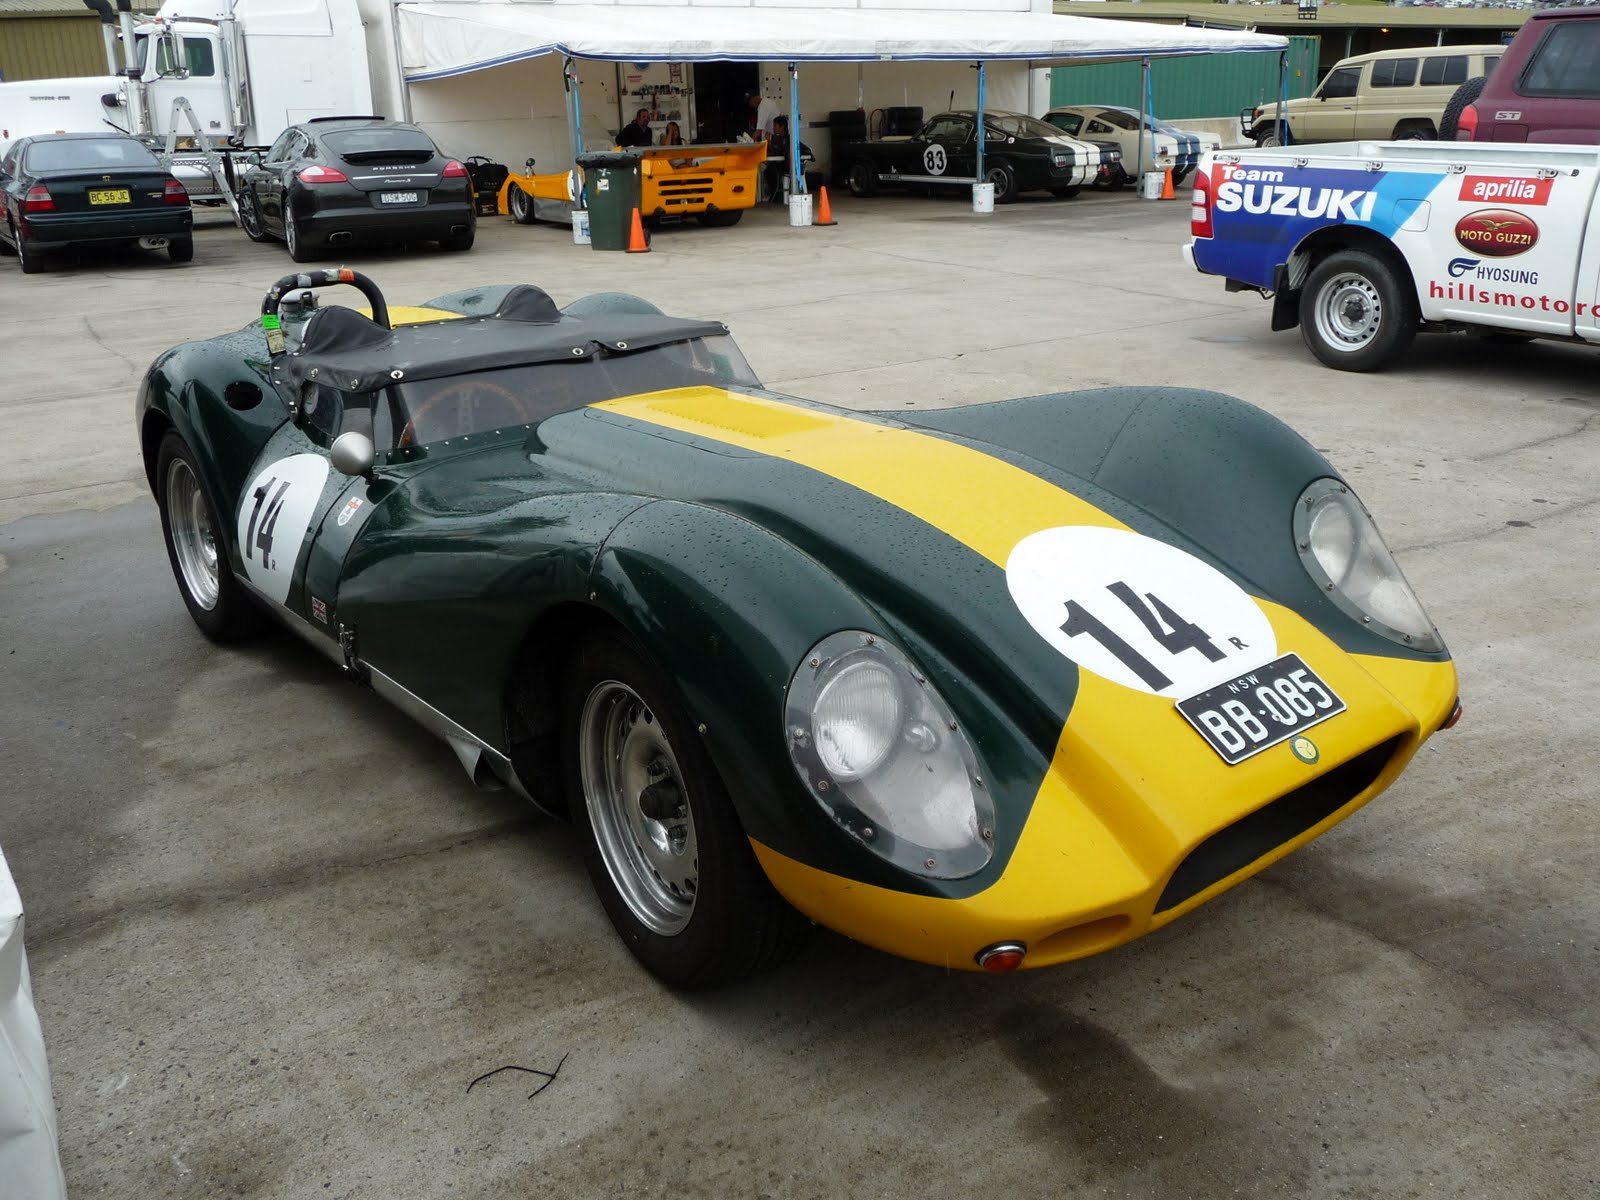 The Classic Lister Knobbly - Very Fast And Very British